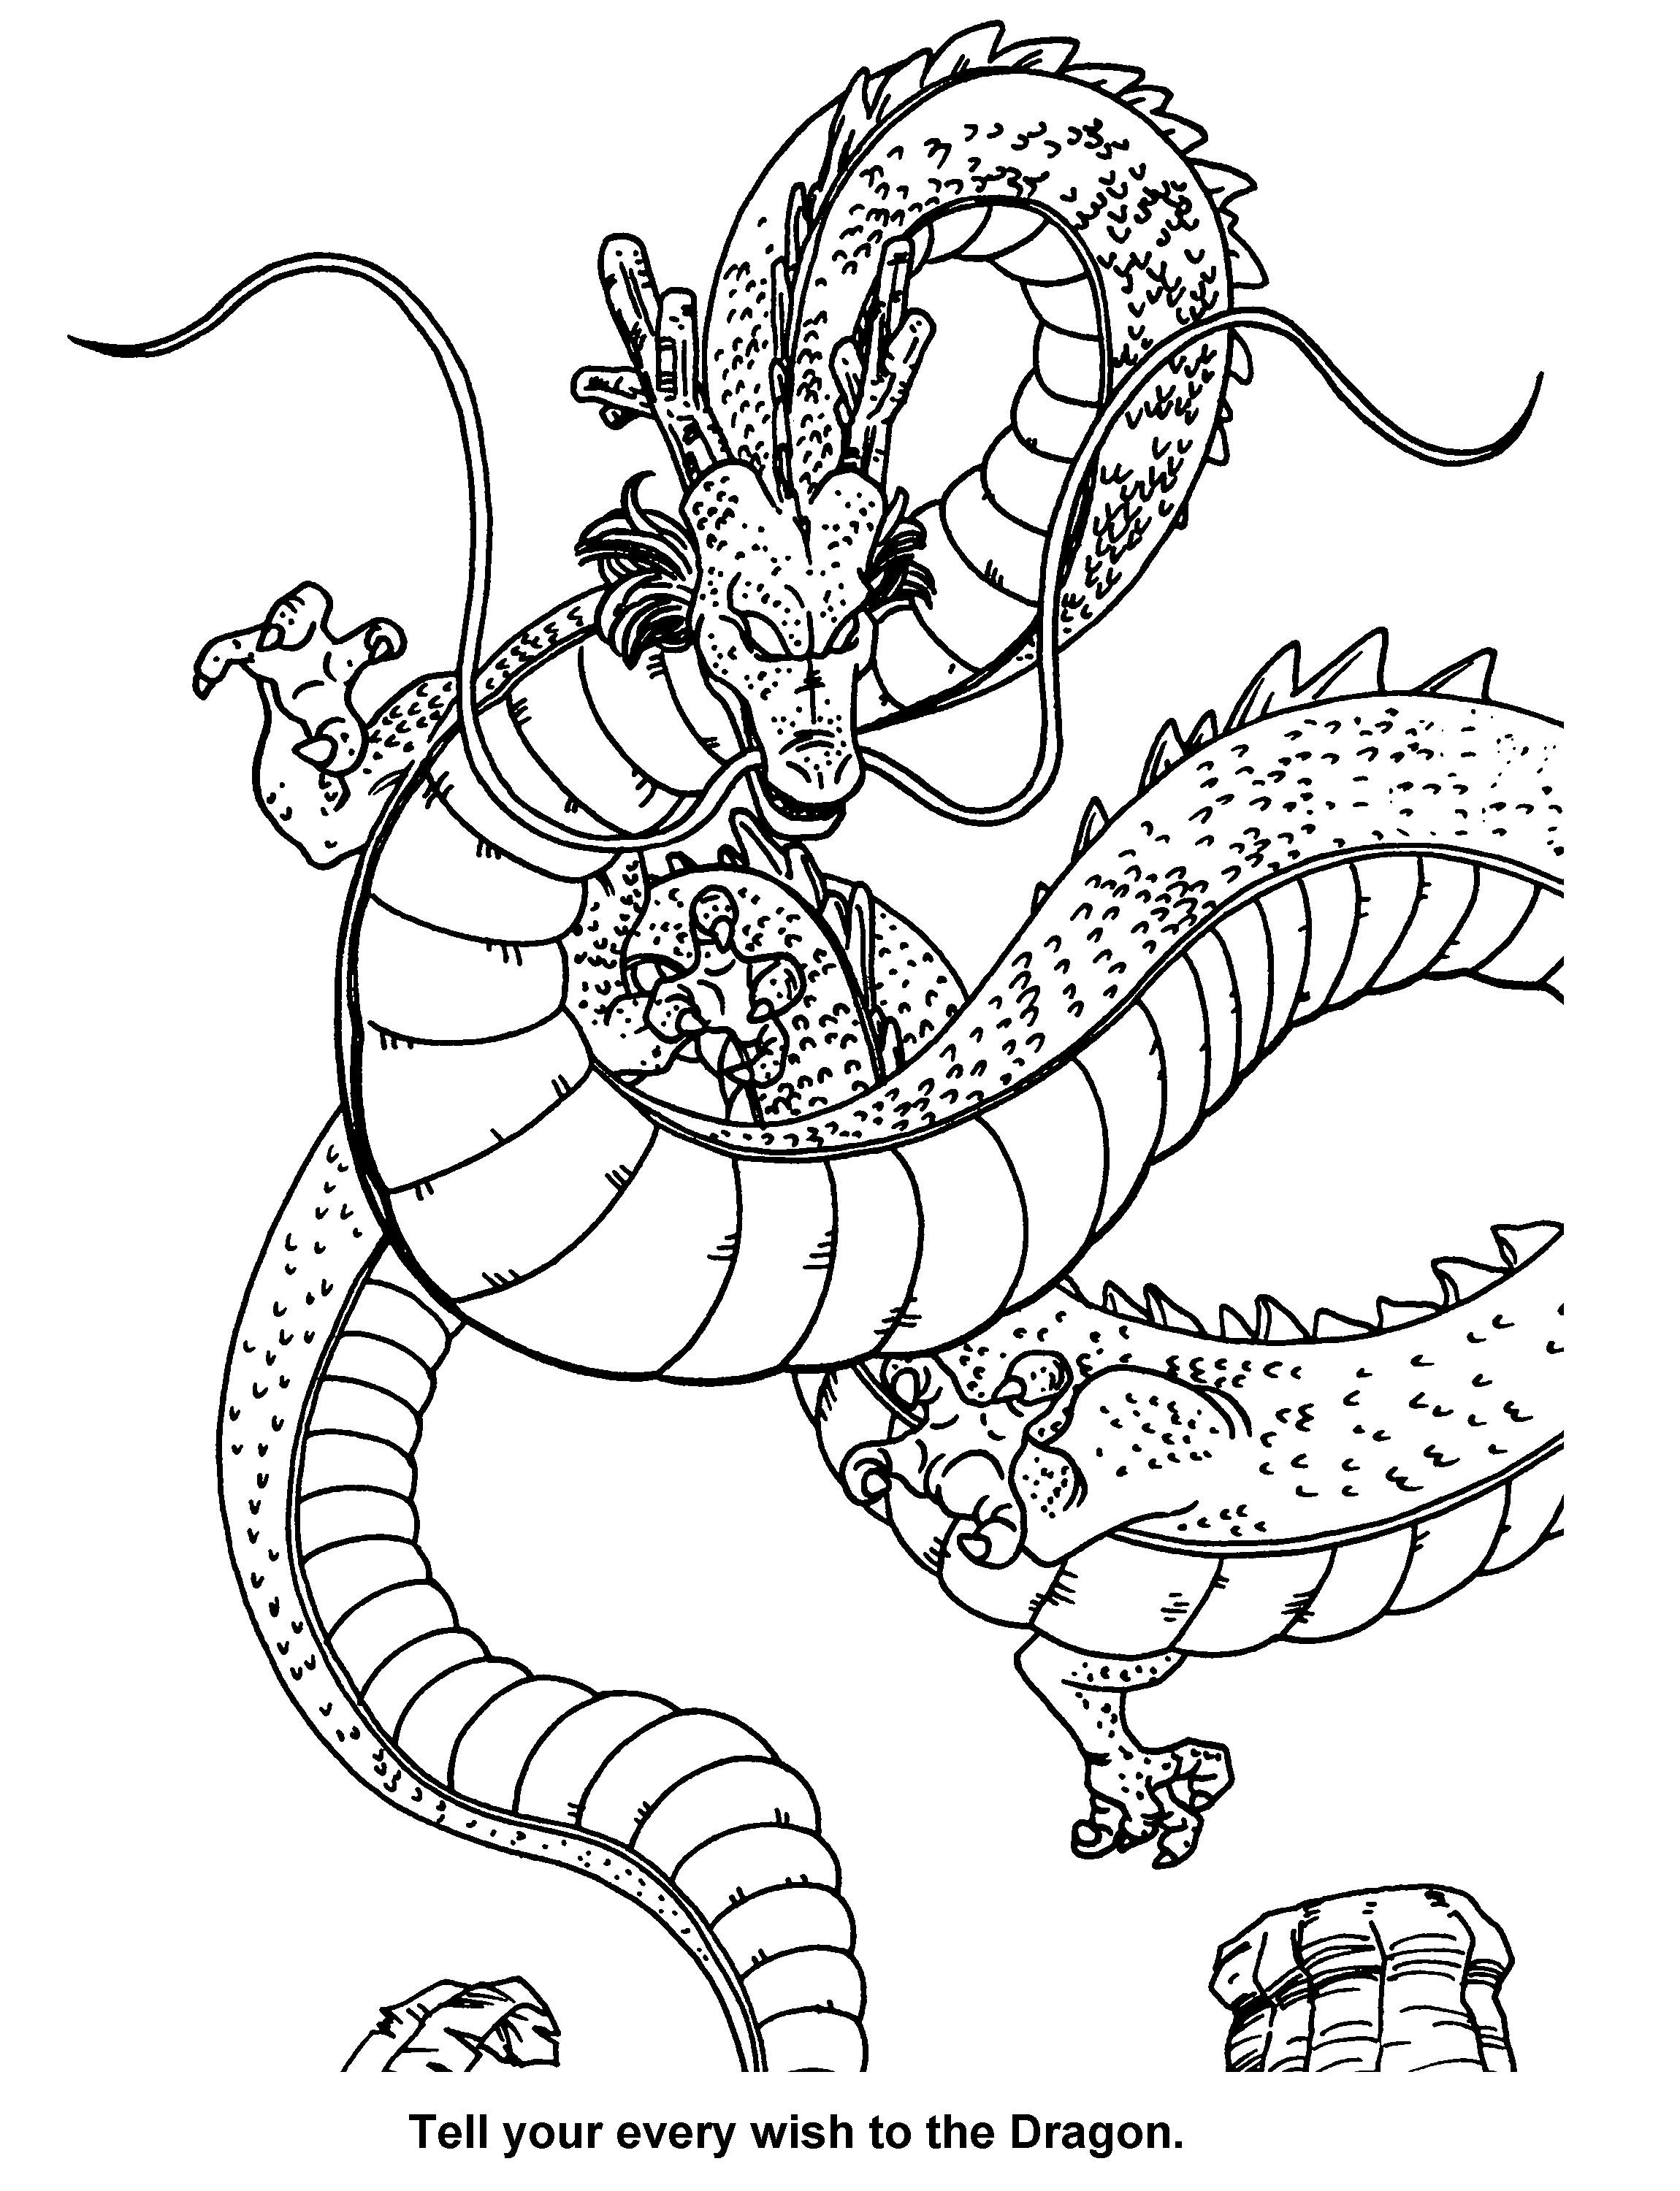 Coloring Page - Dragon ball z coloring pages 33